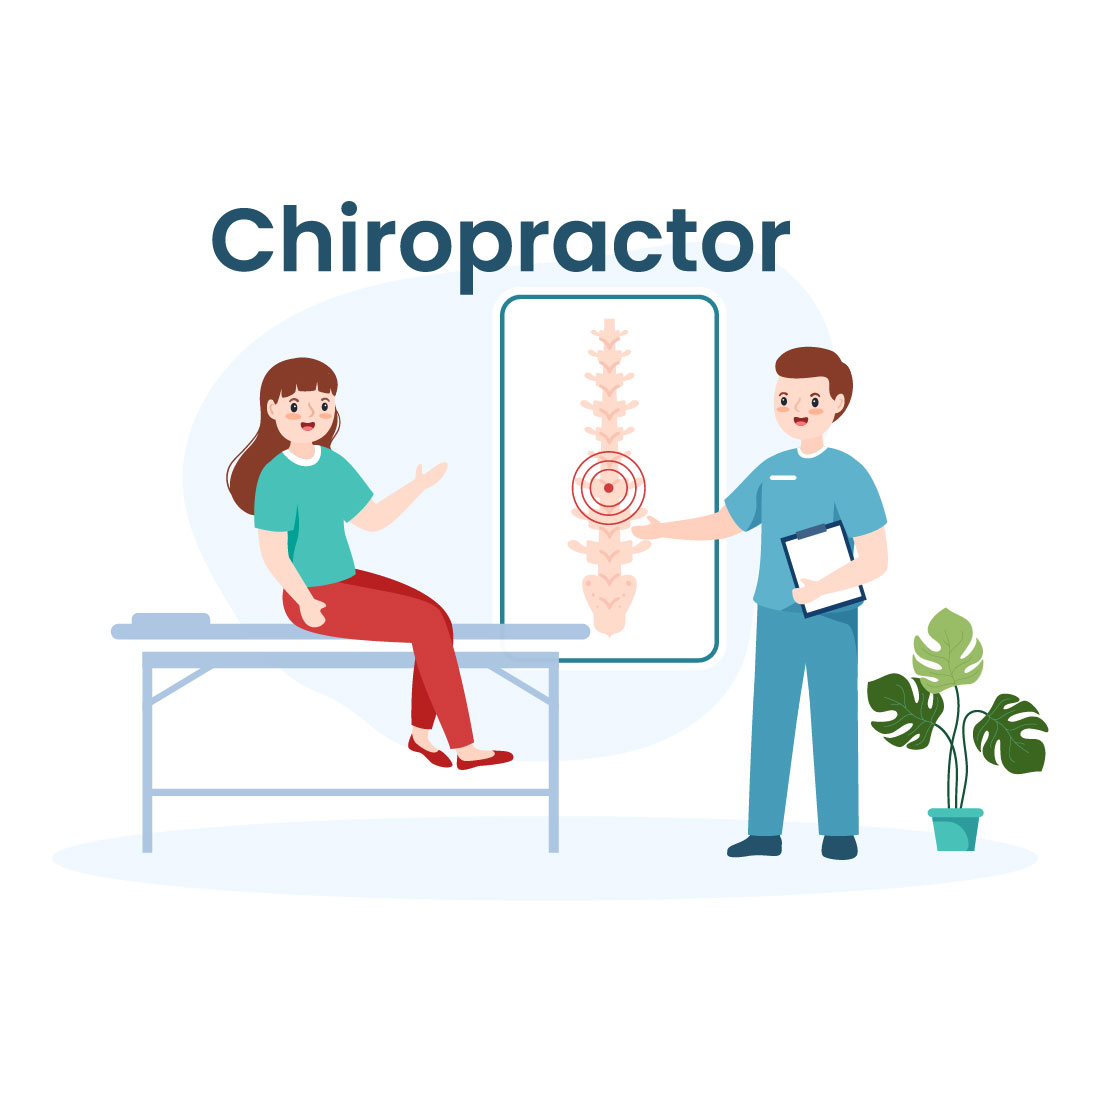 Chiropractor Physiotherapy Rehabilitation Cartoon Illustration cover image.